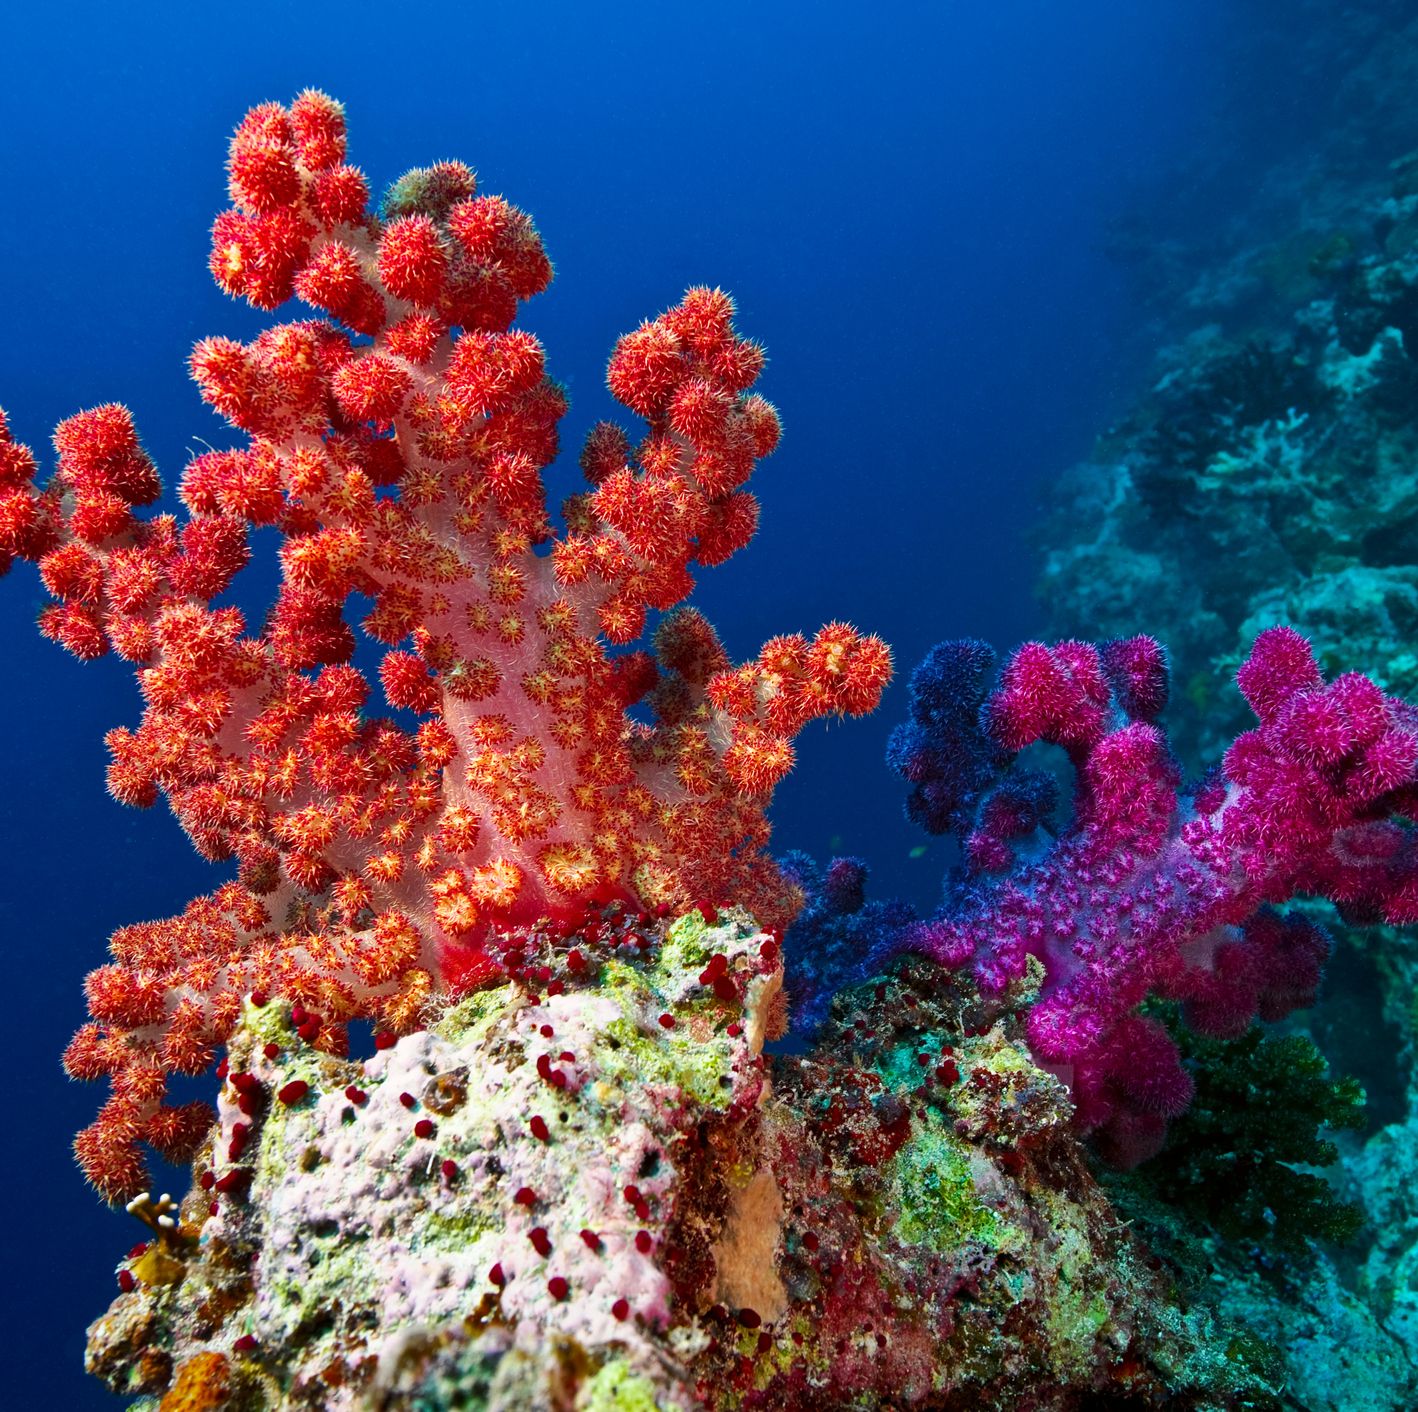 Scientists Are Building a Noah's Ark for Corals